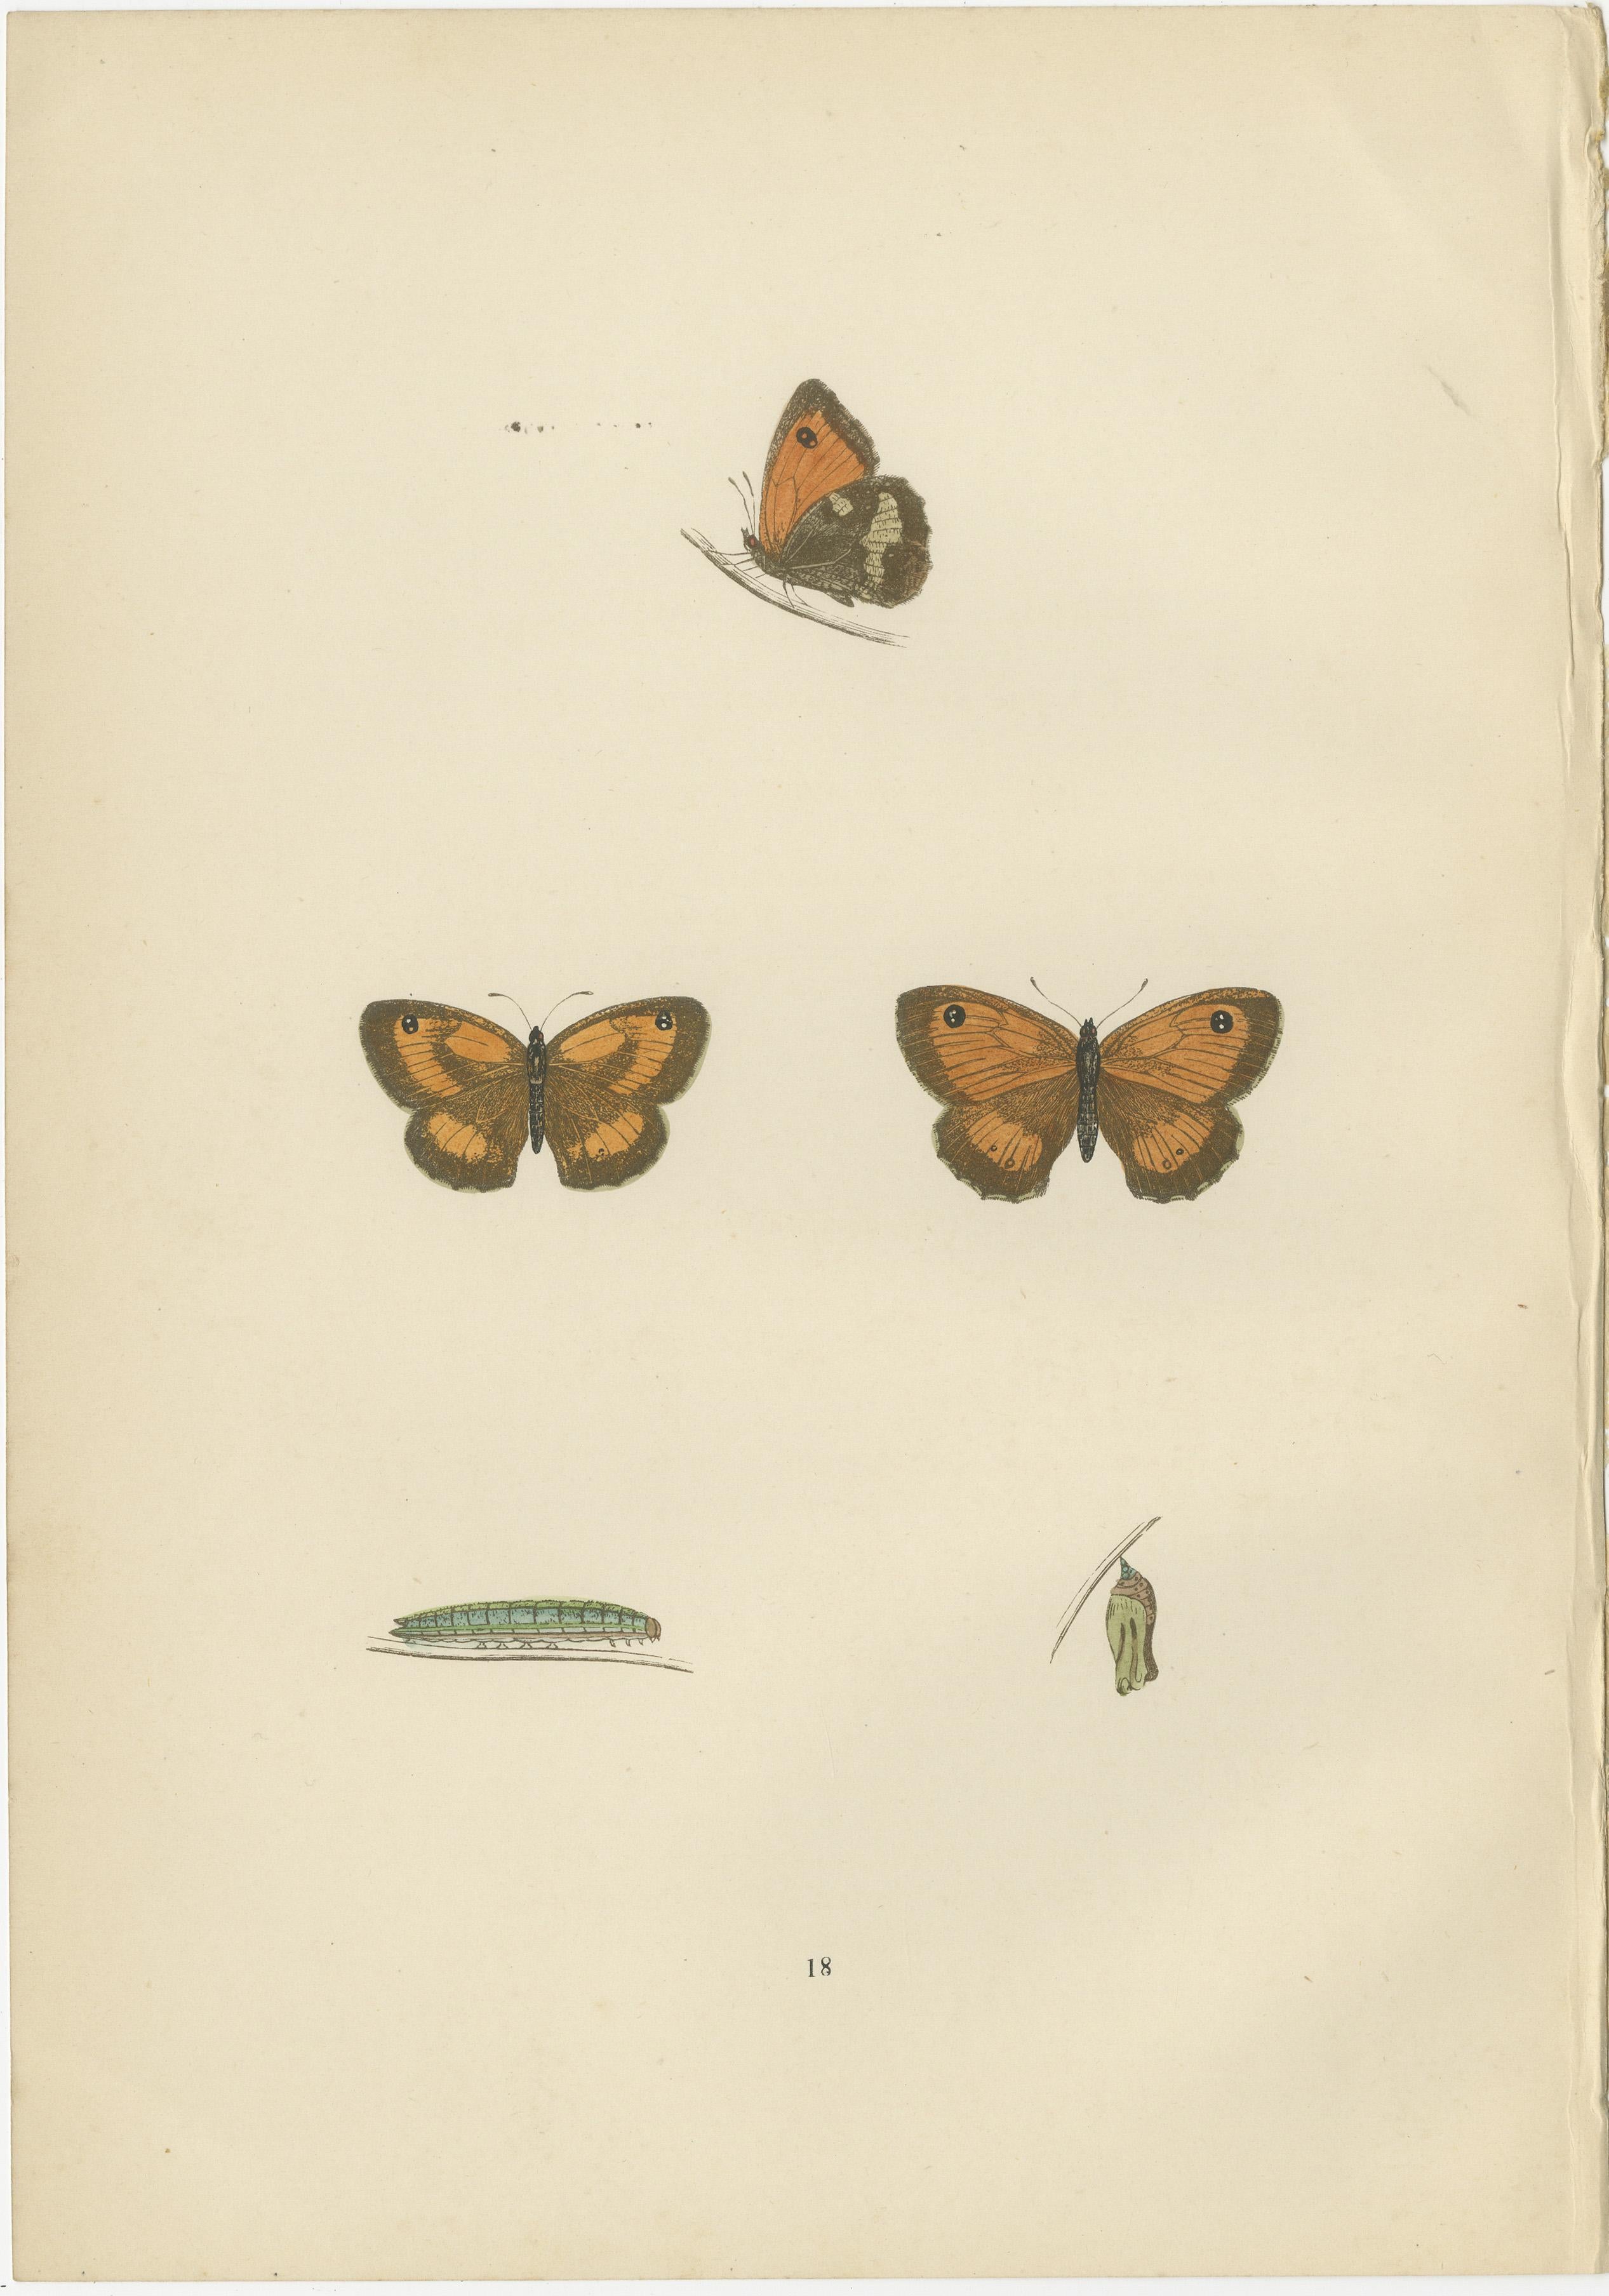 Late 19th Century Metamorphosis Montage: The Lepidopteran Lifecycle, 1890 For Sale